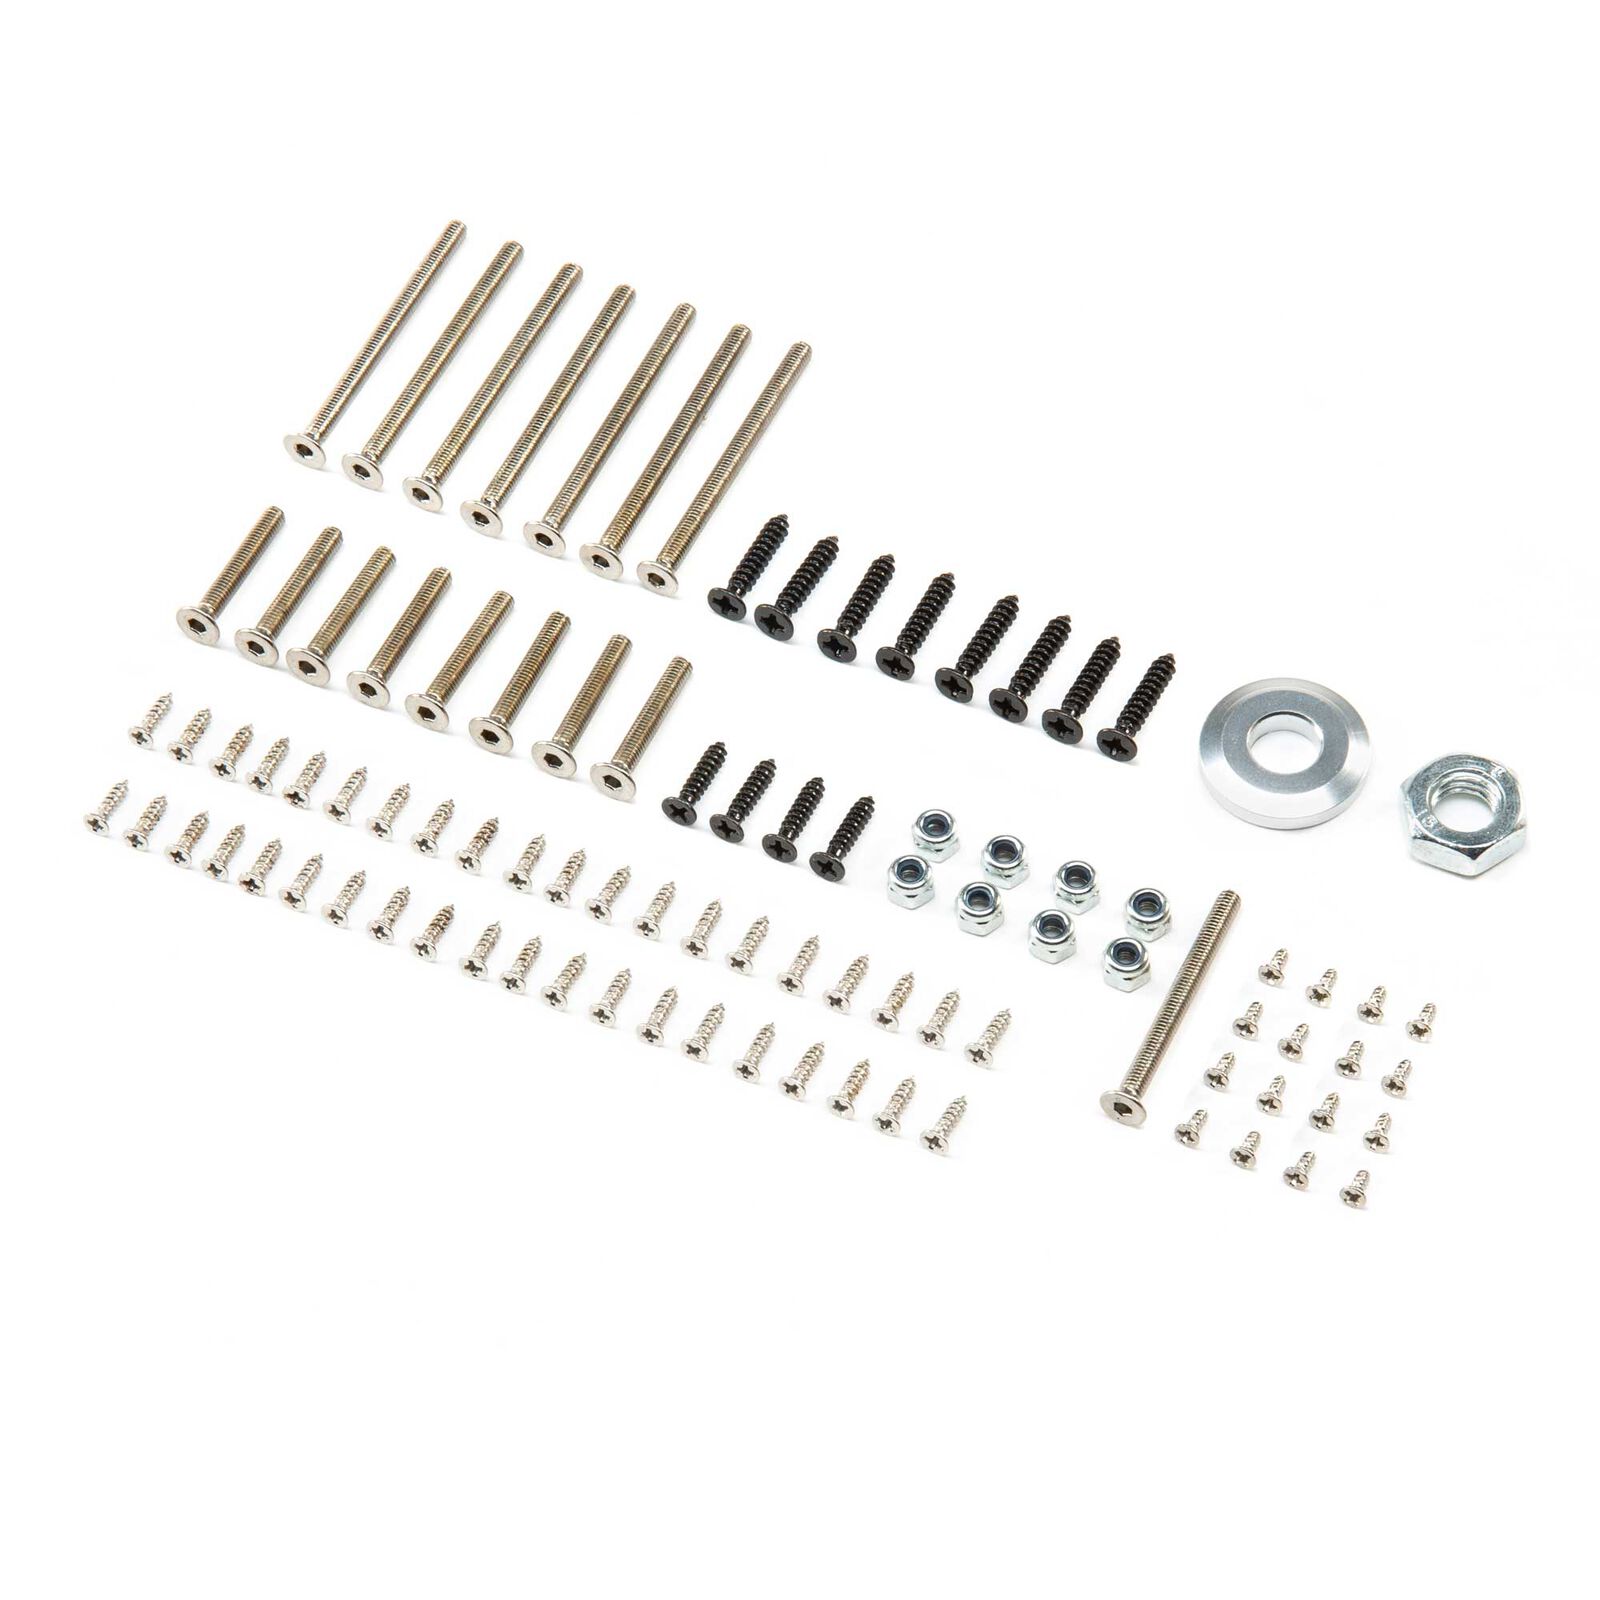 Screw and Bolt Hardware Set: P-51D 1.5m Mustang